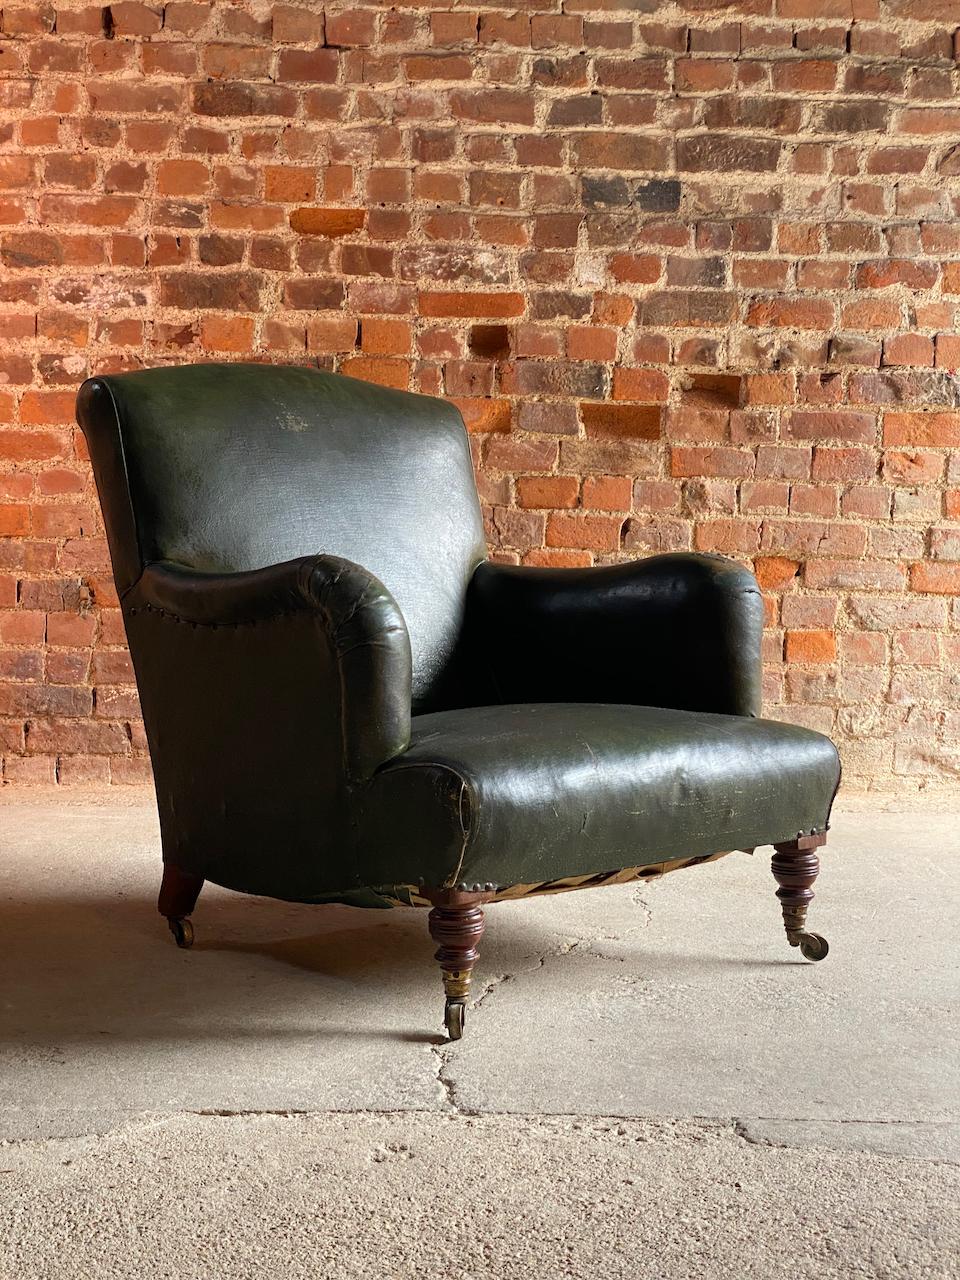 Howard & Sons Bridgewater armchairs 19th Century England Circa 1840

A magnificent early edition 19th century Howard & Sons ‘English Country House’ Bridgewater armchair England circa 1840, this magnificent Bridgewater armchair is of typical form